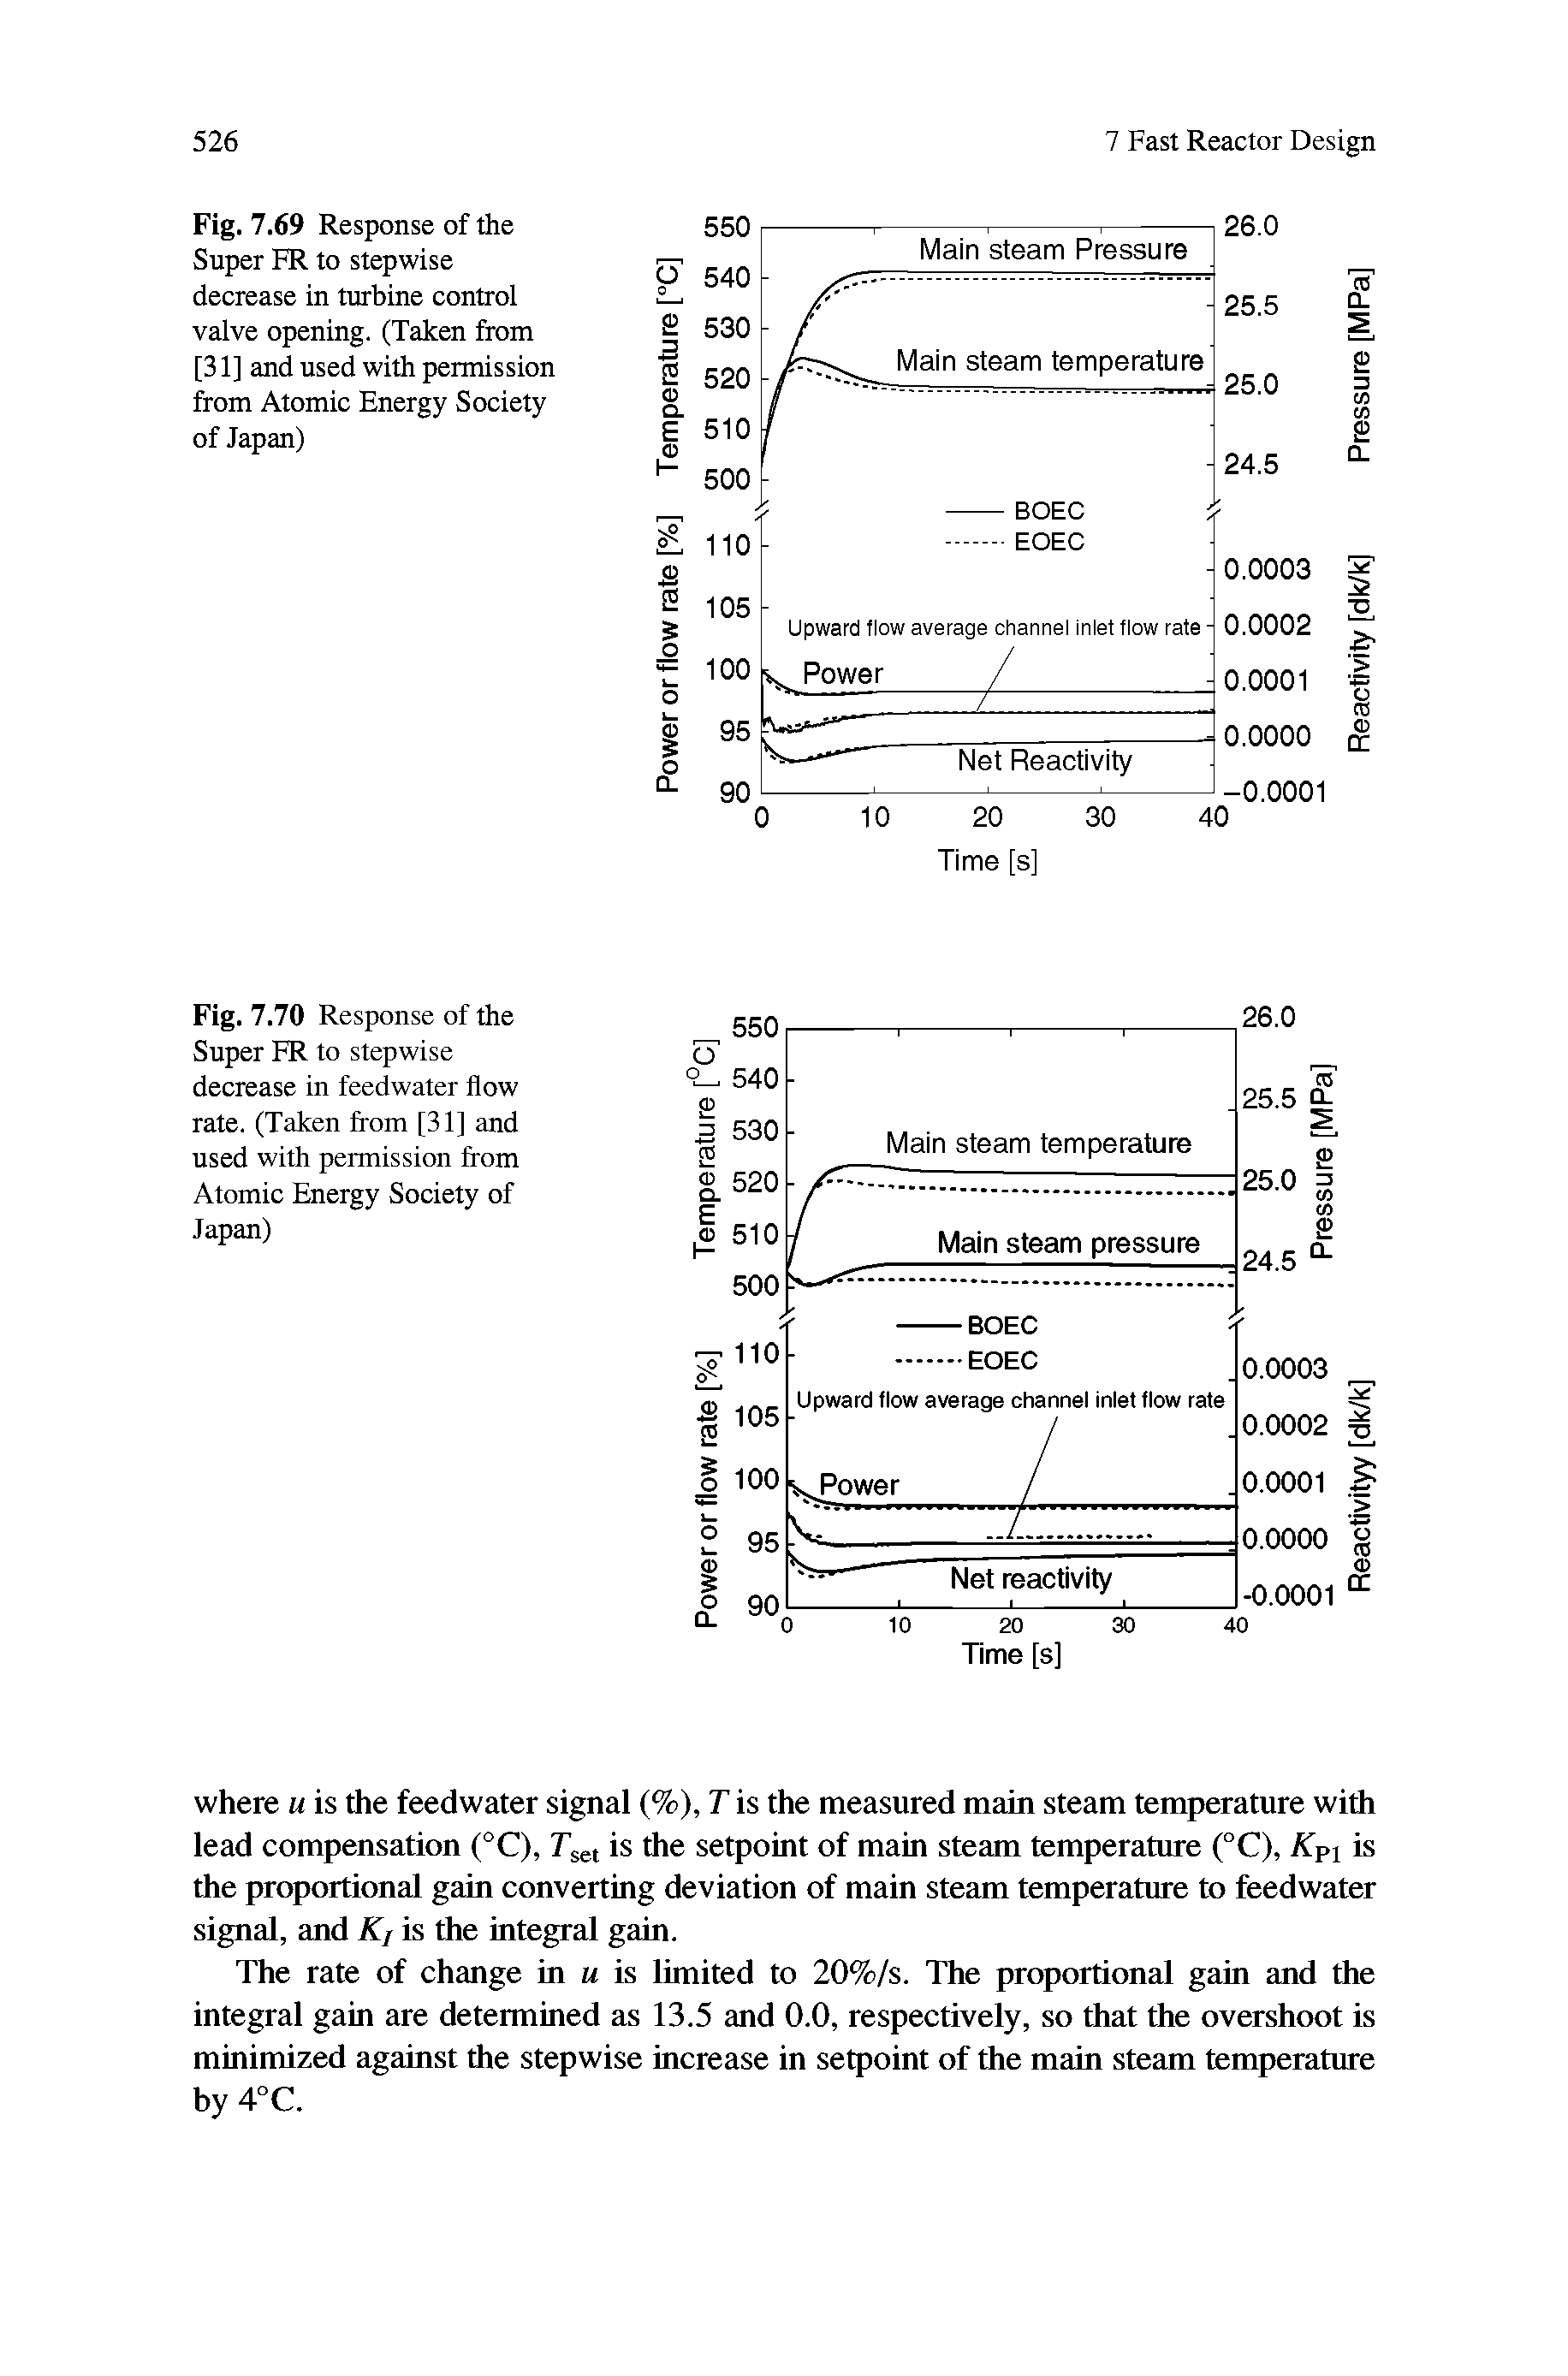 Fig. 7.70 Response of the Super ER to stepwise decrease in feedwater flow rate. (Taken from [31] and used with permission from Atomic Energy Society of Japan)...